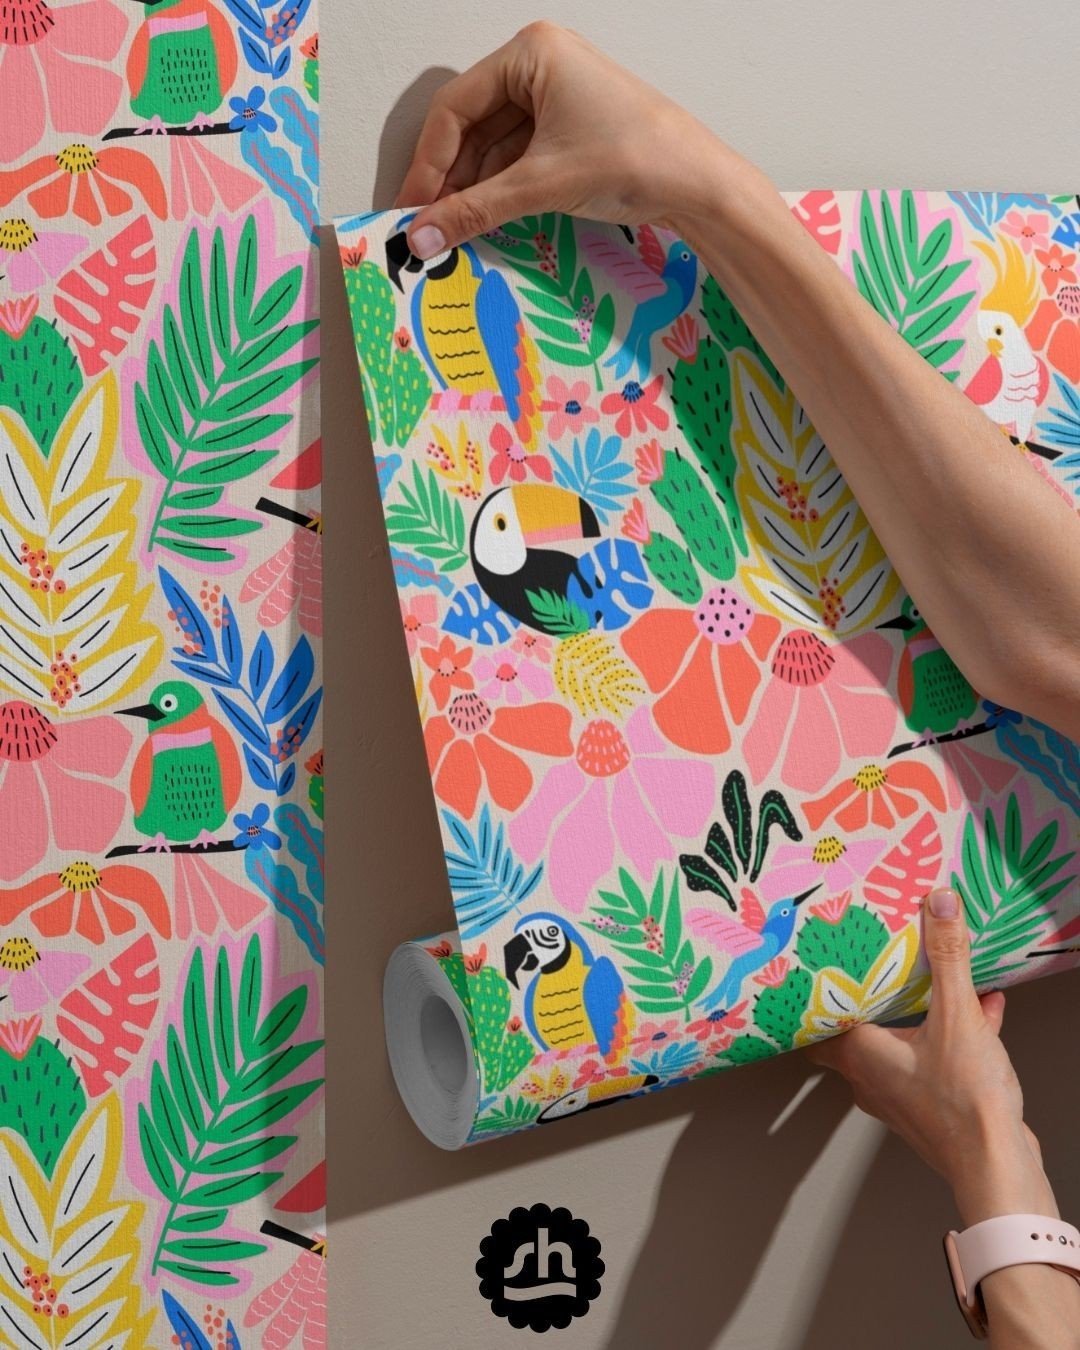 Transform your space with the vibrant energy of my Joyful Jungle design featuring exotic birds and plants in happy colors! 🌿🦜 Now available in my @Spoonflower store on six stunning wallpaper options. ⁠
⁠
Tap the link in my bio to shop now!